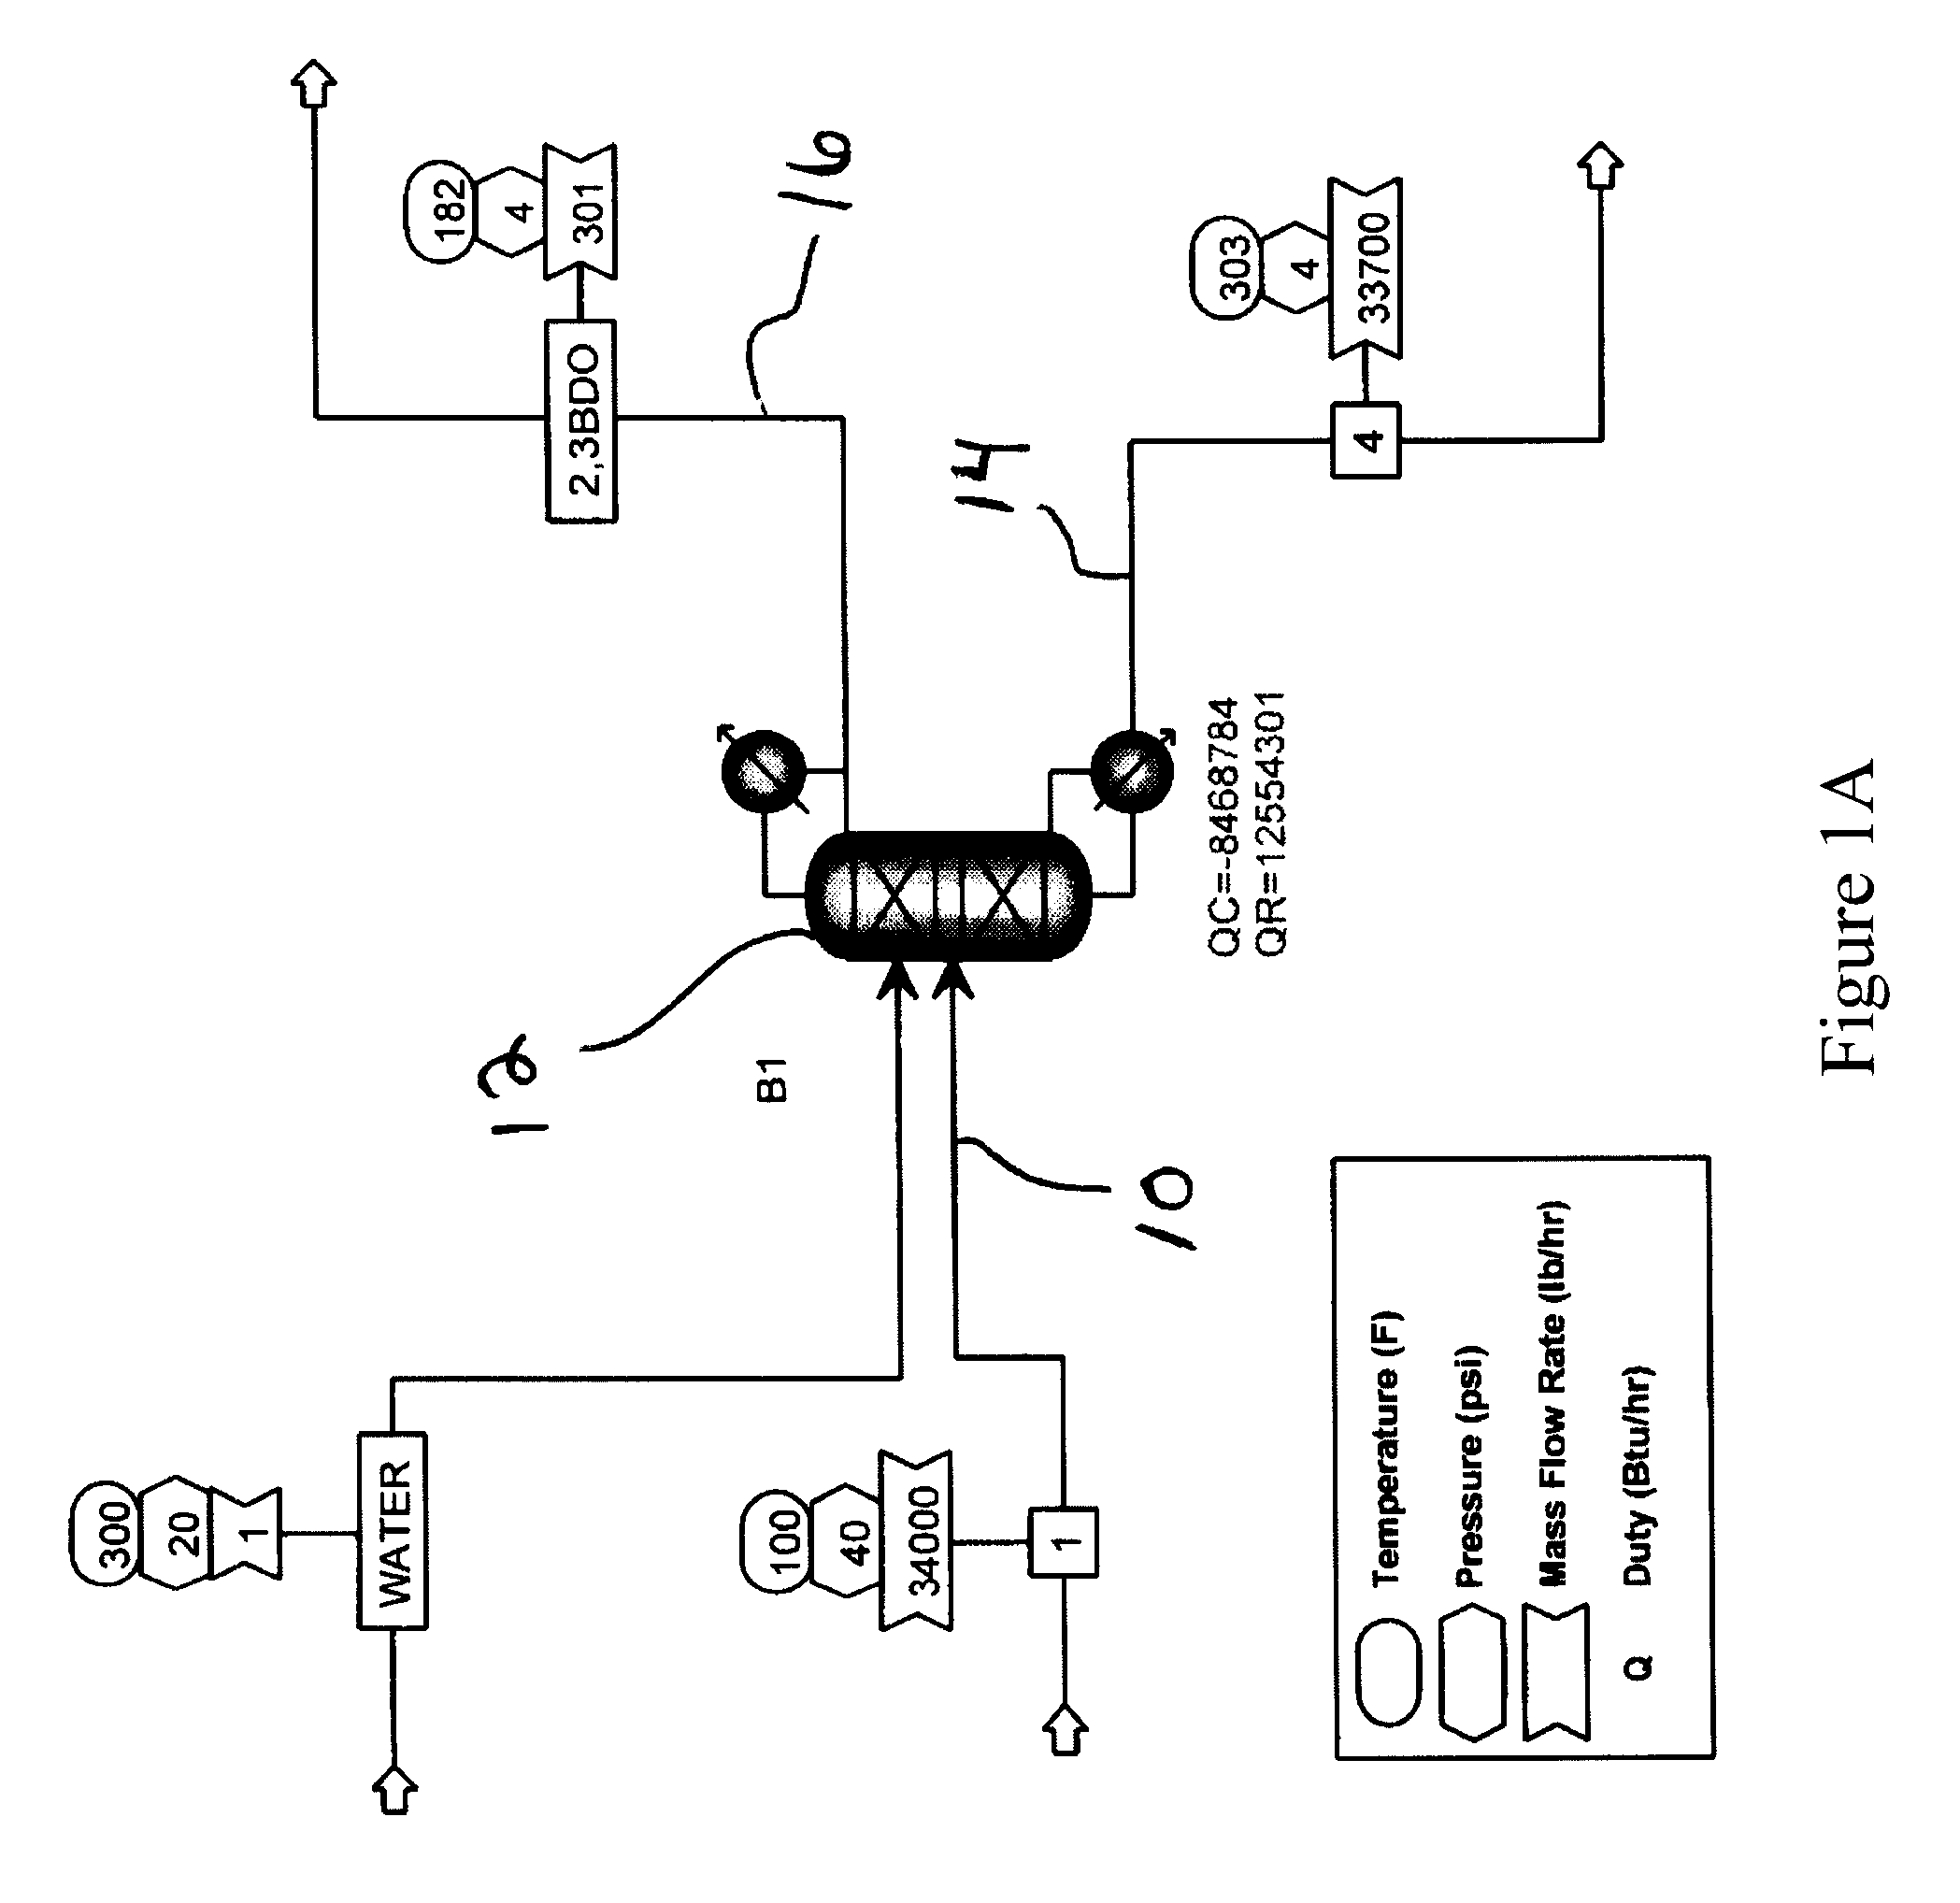 Processes for isolating or purifying propylene glycol, ethylene glycol and products produced therefrom